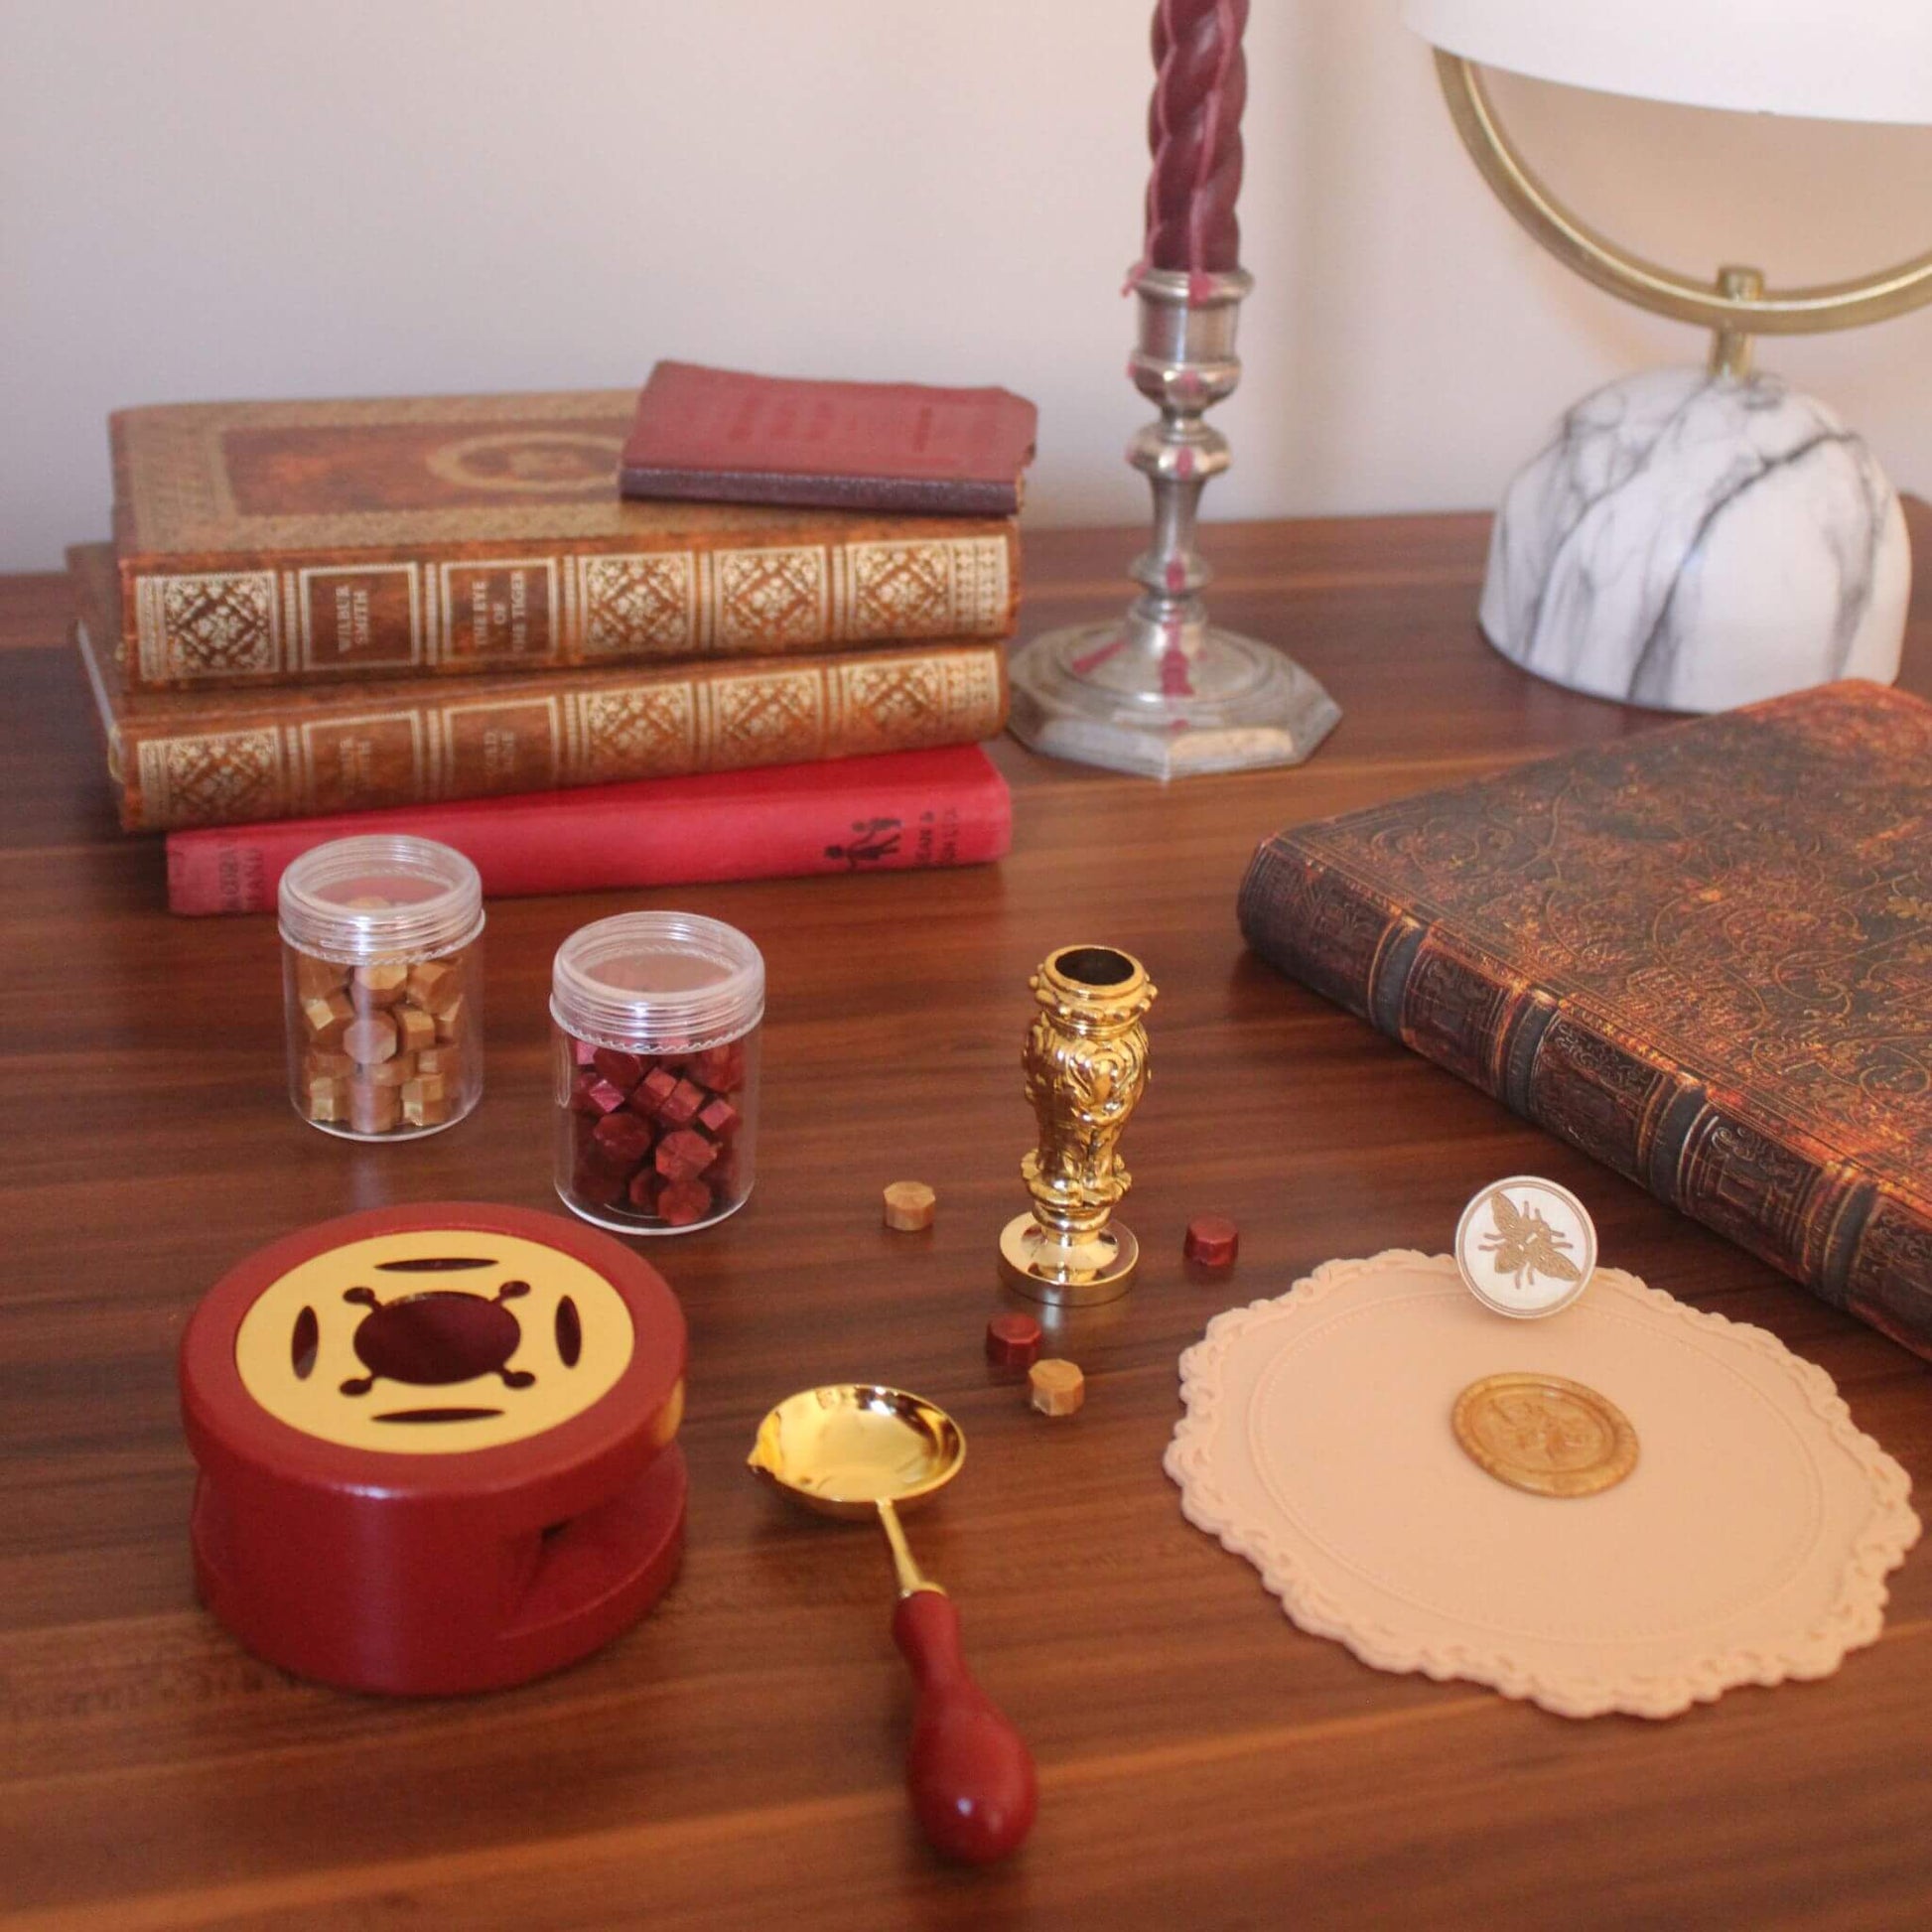 wax seal kit with sealing wax and wax stamps